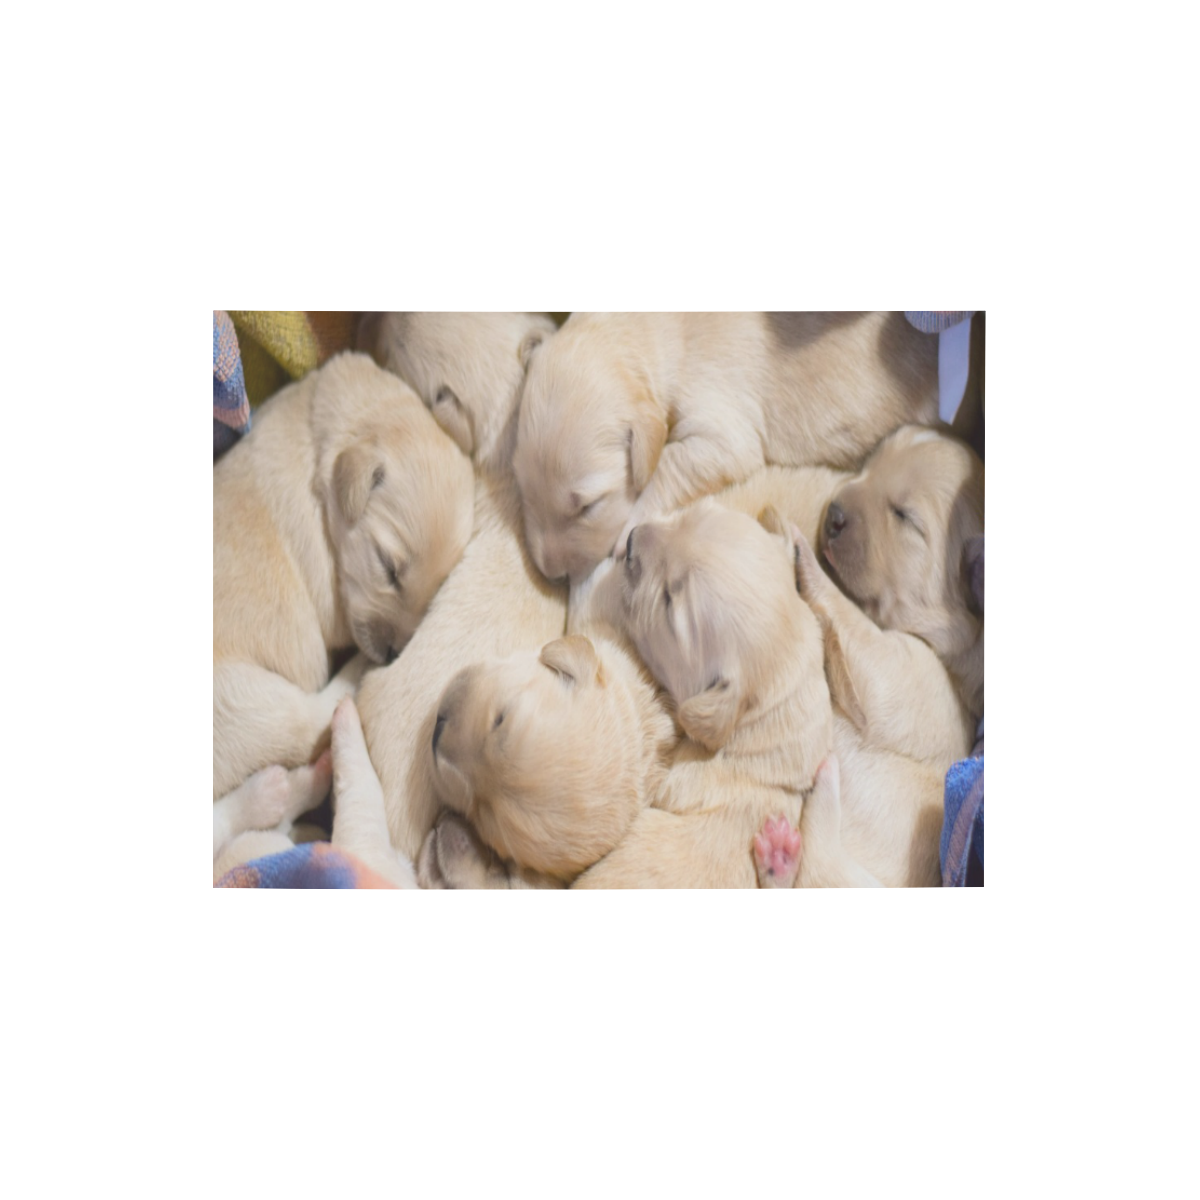 Basket Of Puppies Photo Panel for Tabletop Display 8"x6"